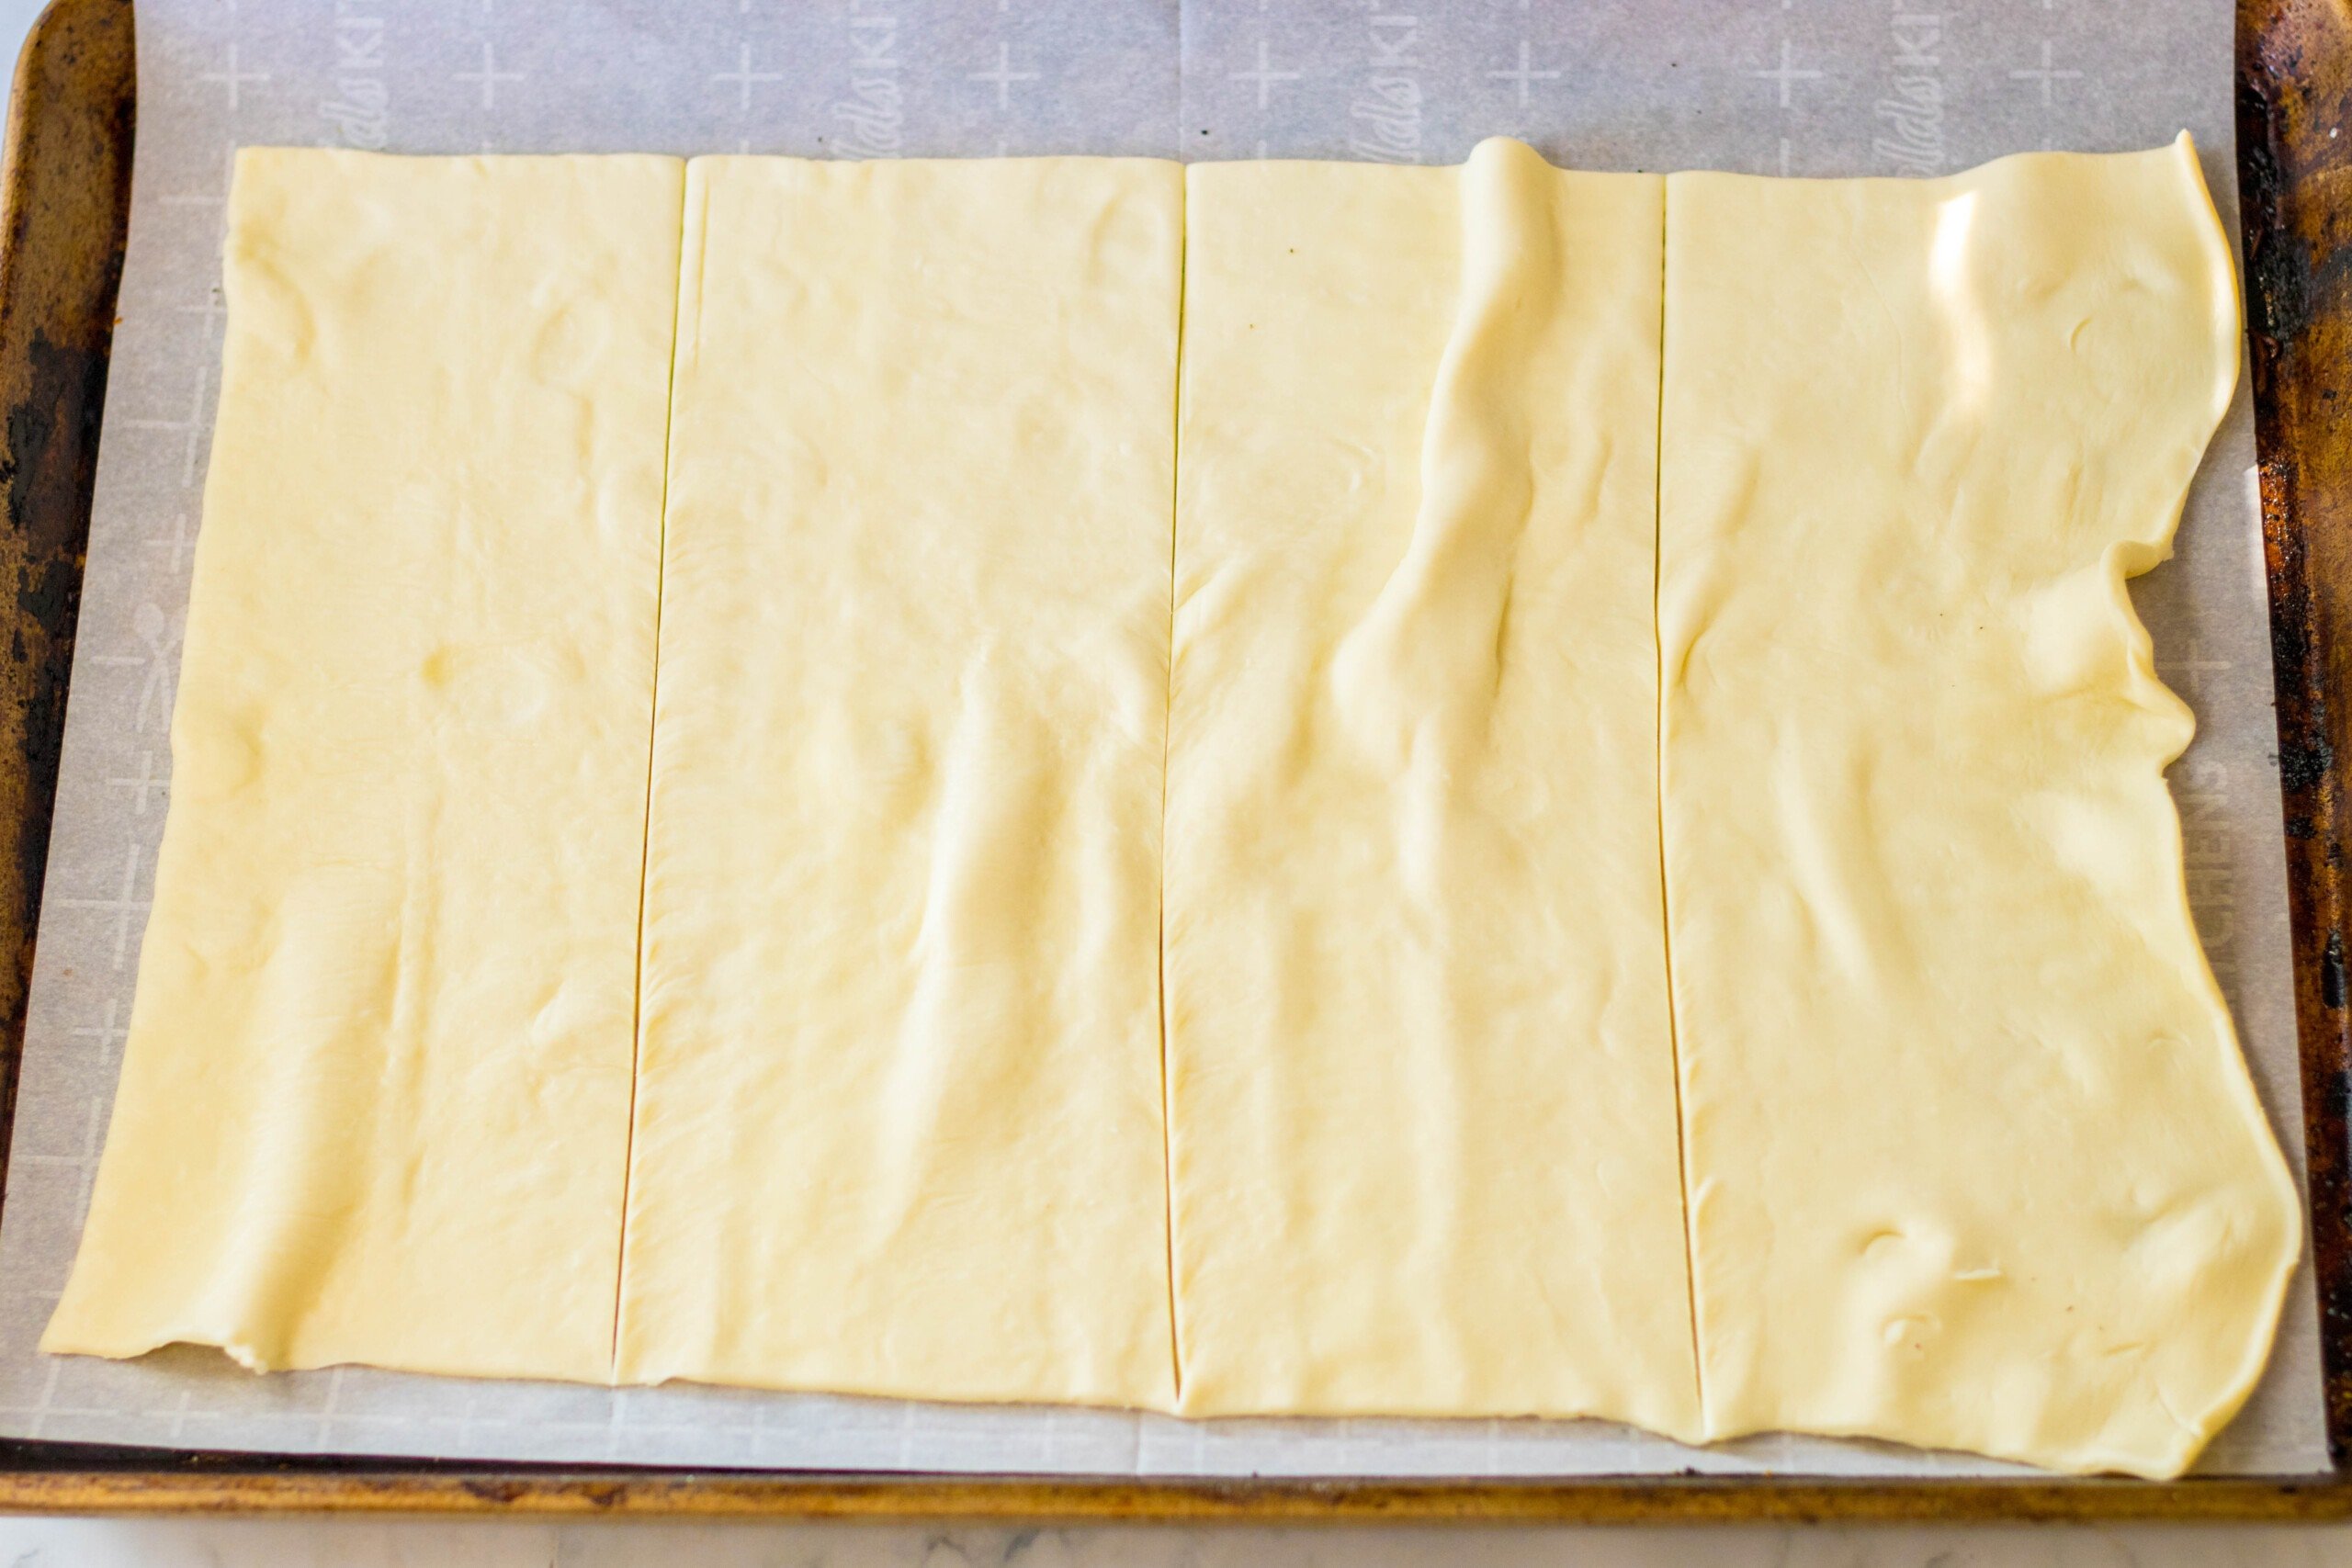 Cutting the puff pastry.